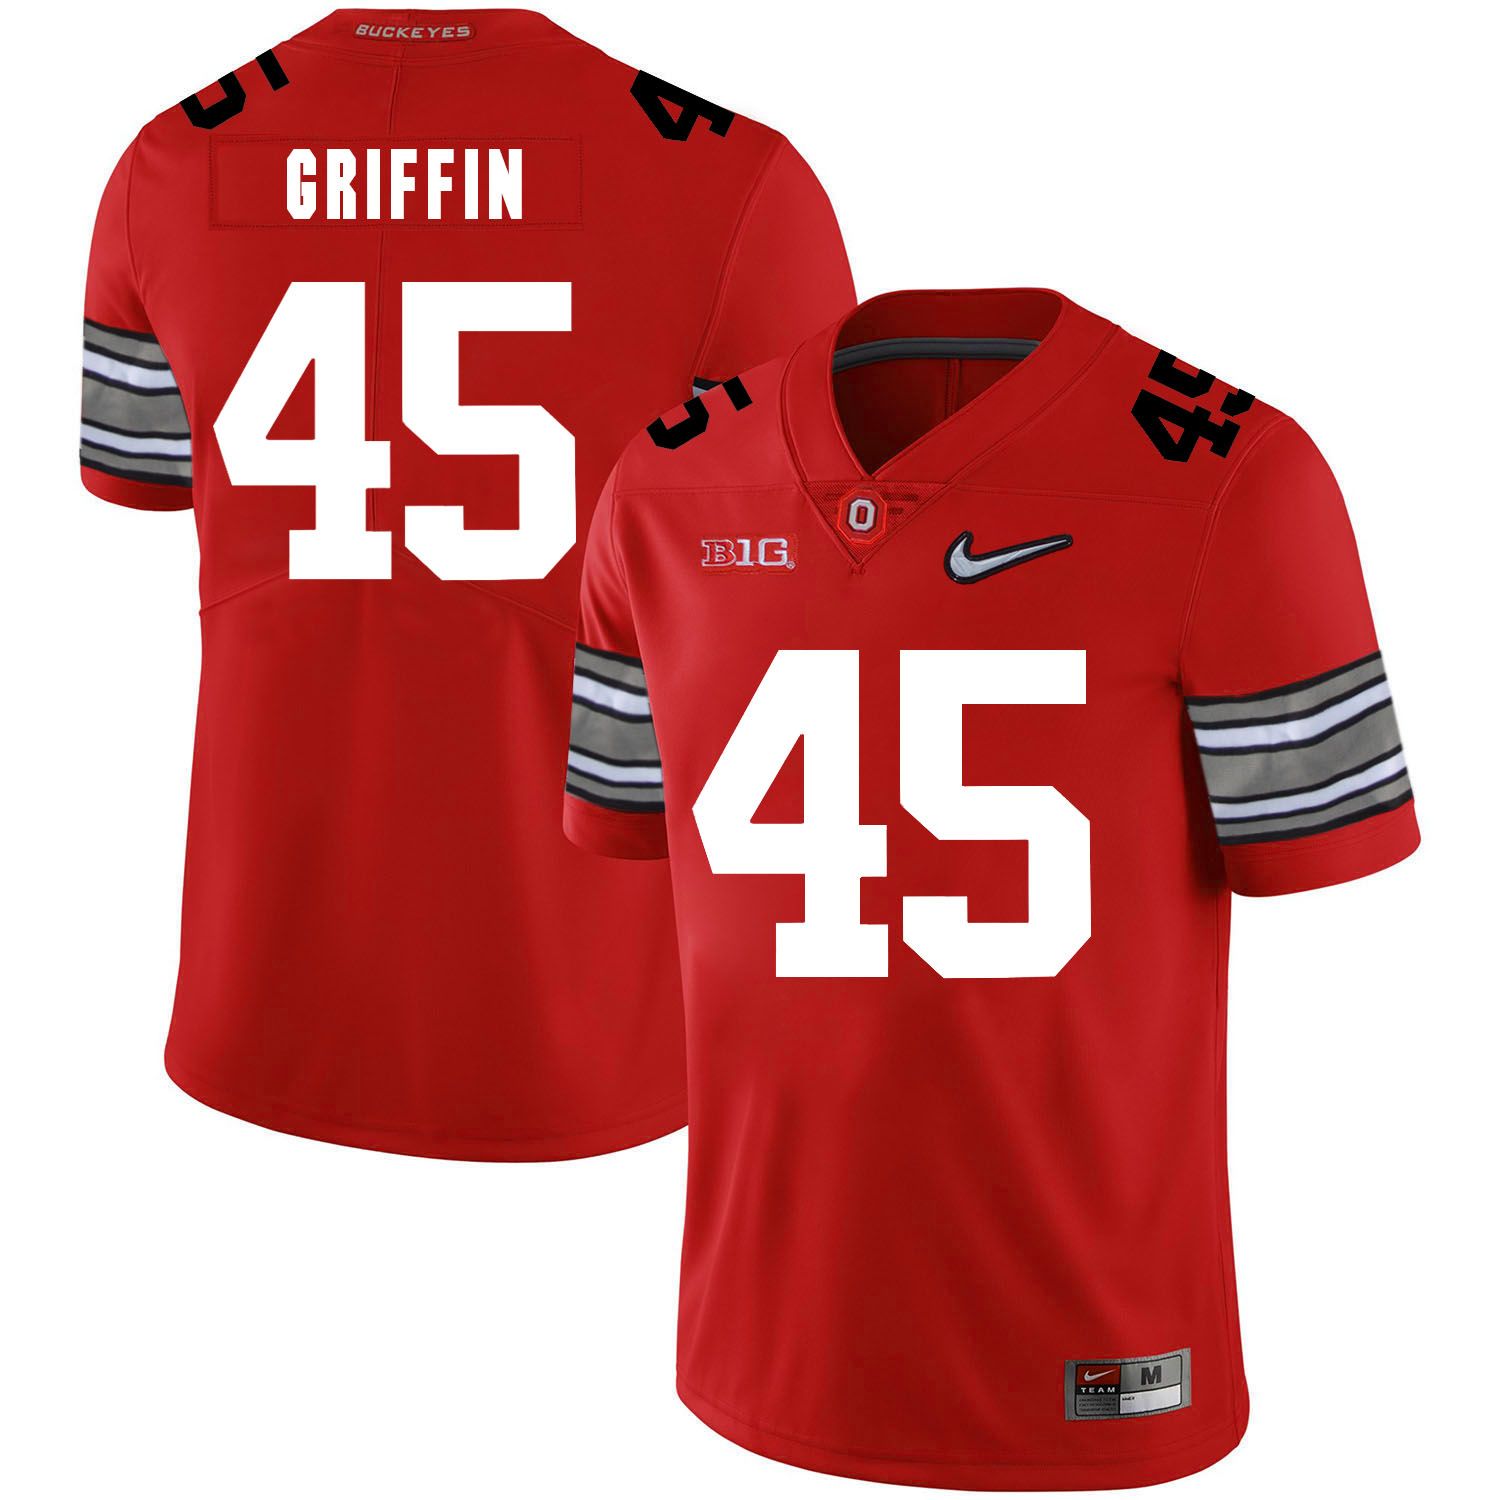 Ohio State Buckeyes 45 Archie Griffin Red Diamond Nike Logo College Football Jersey